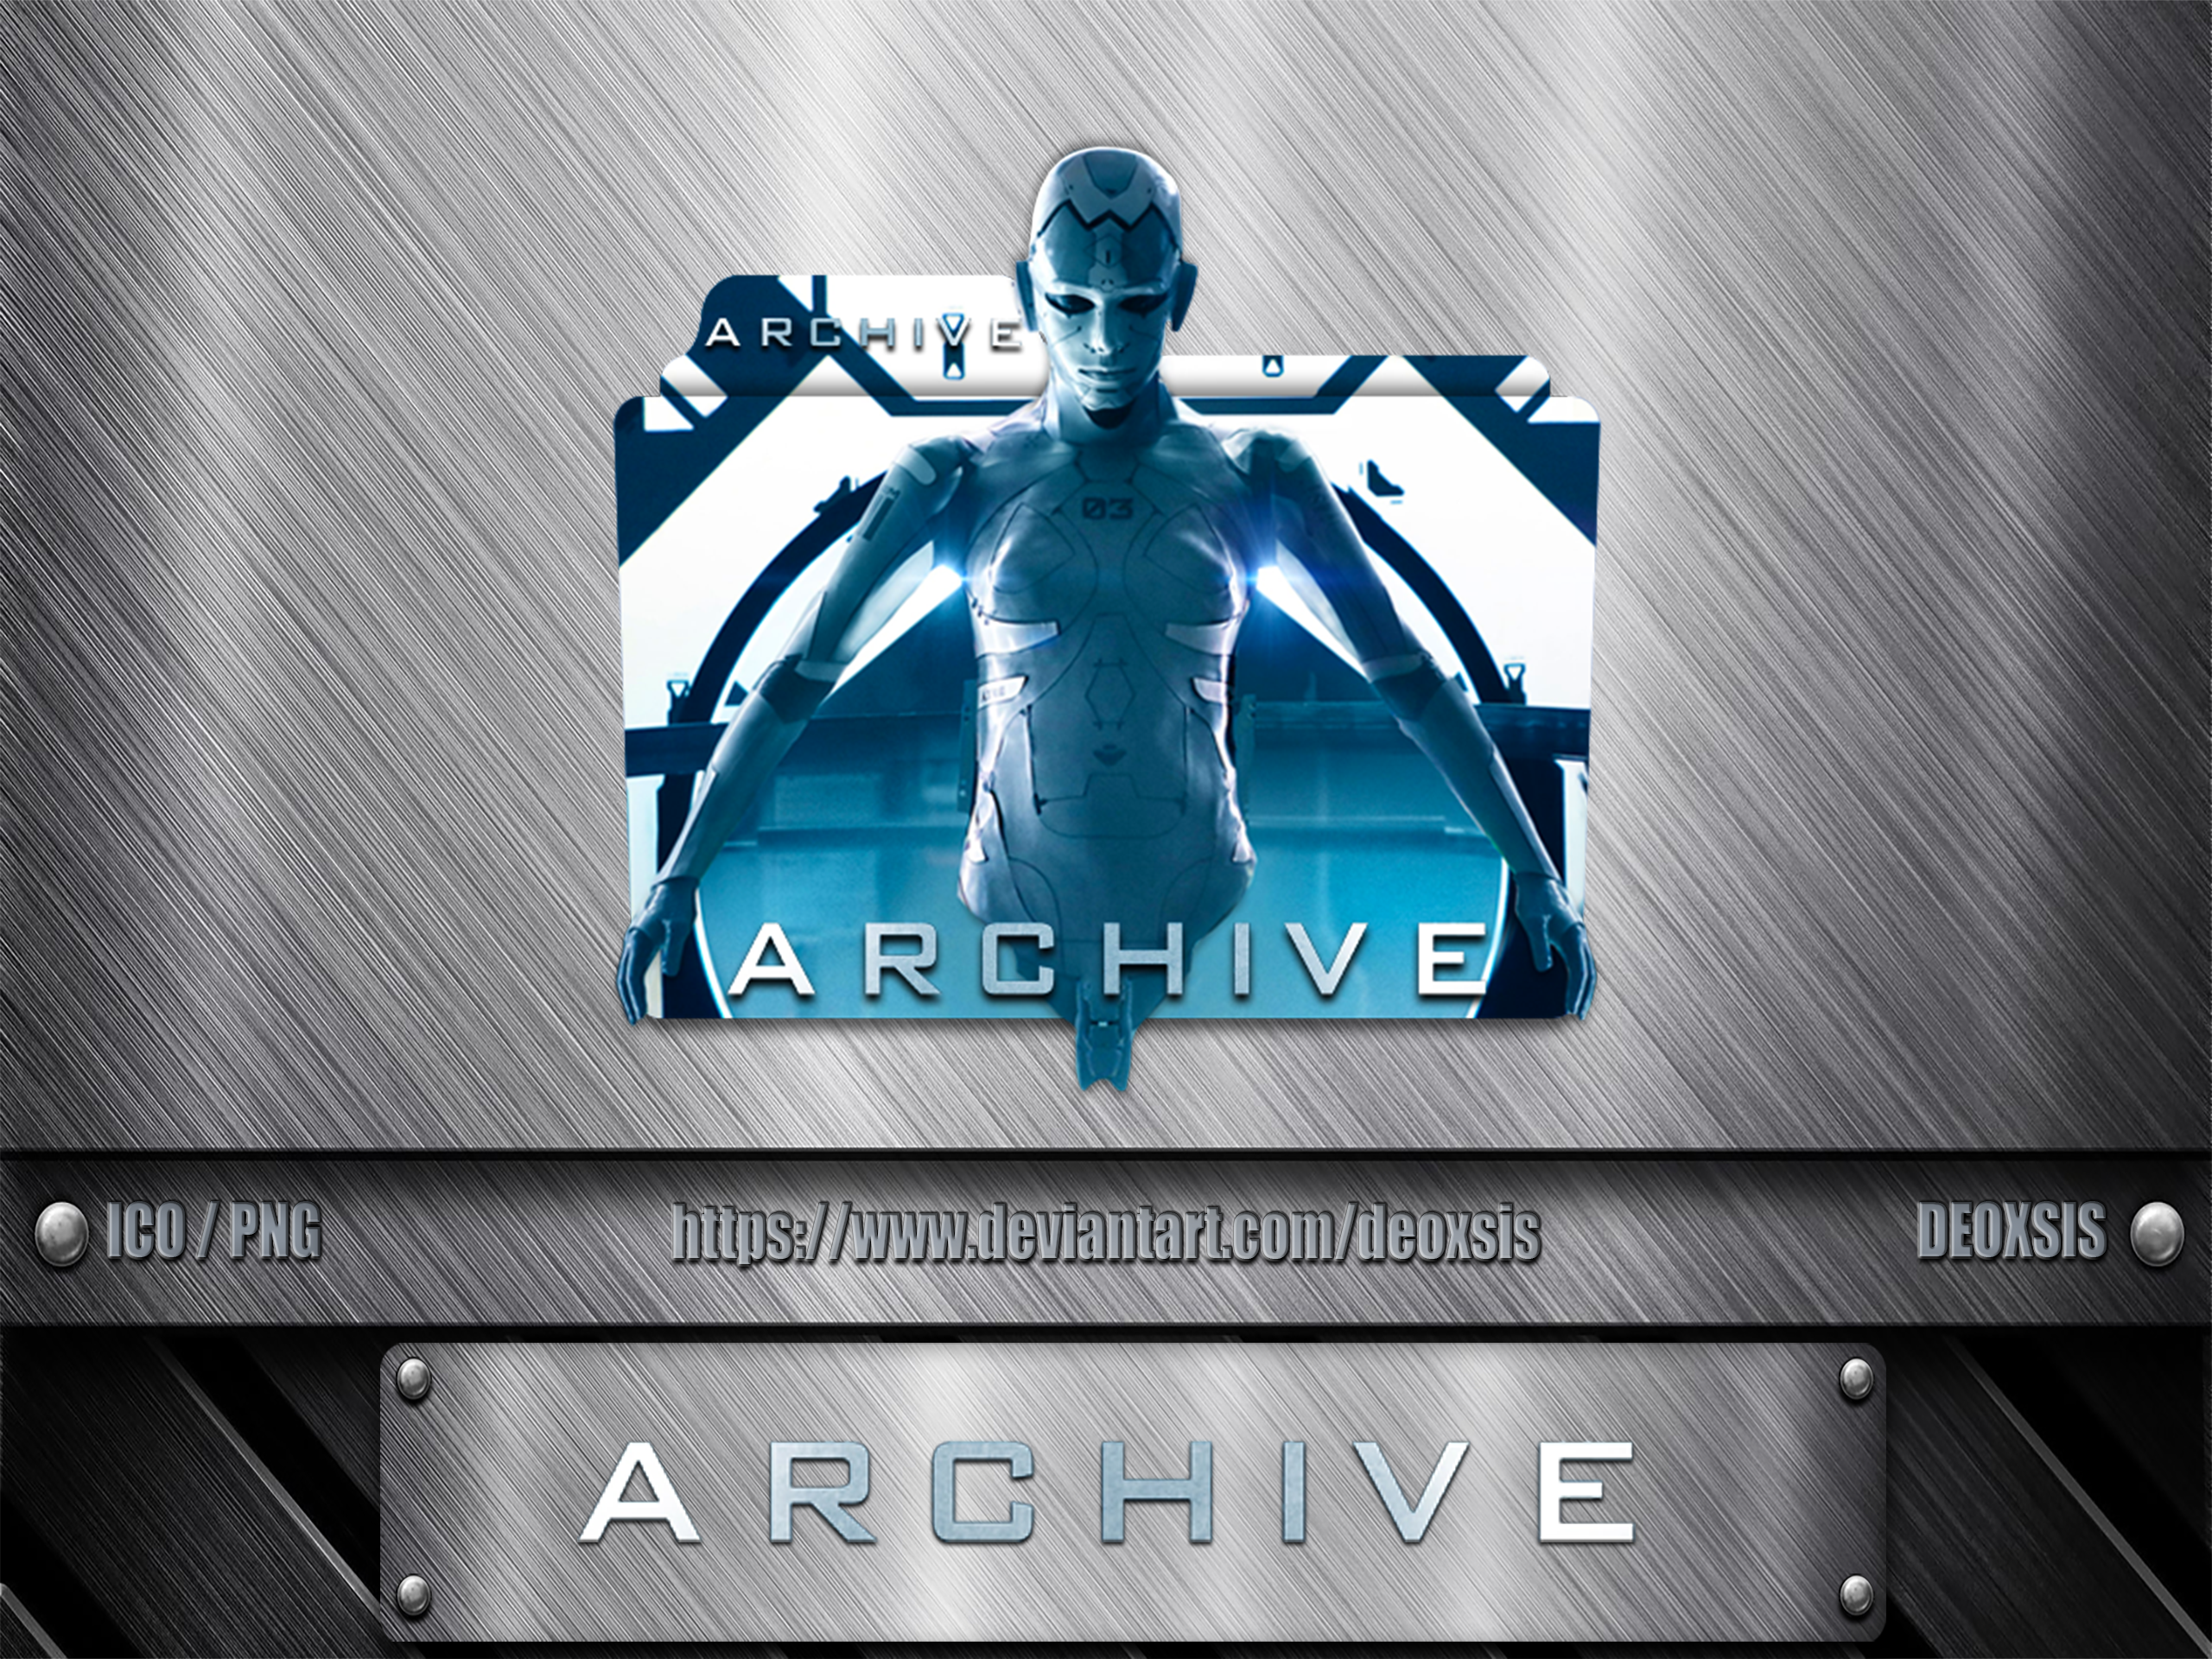 Archive [2020] Folder Icon by deoxsis on DeviantArt